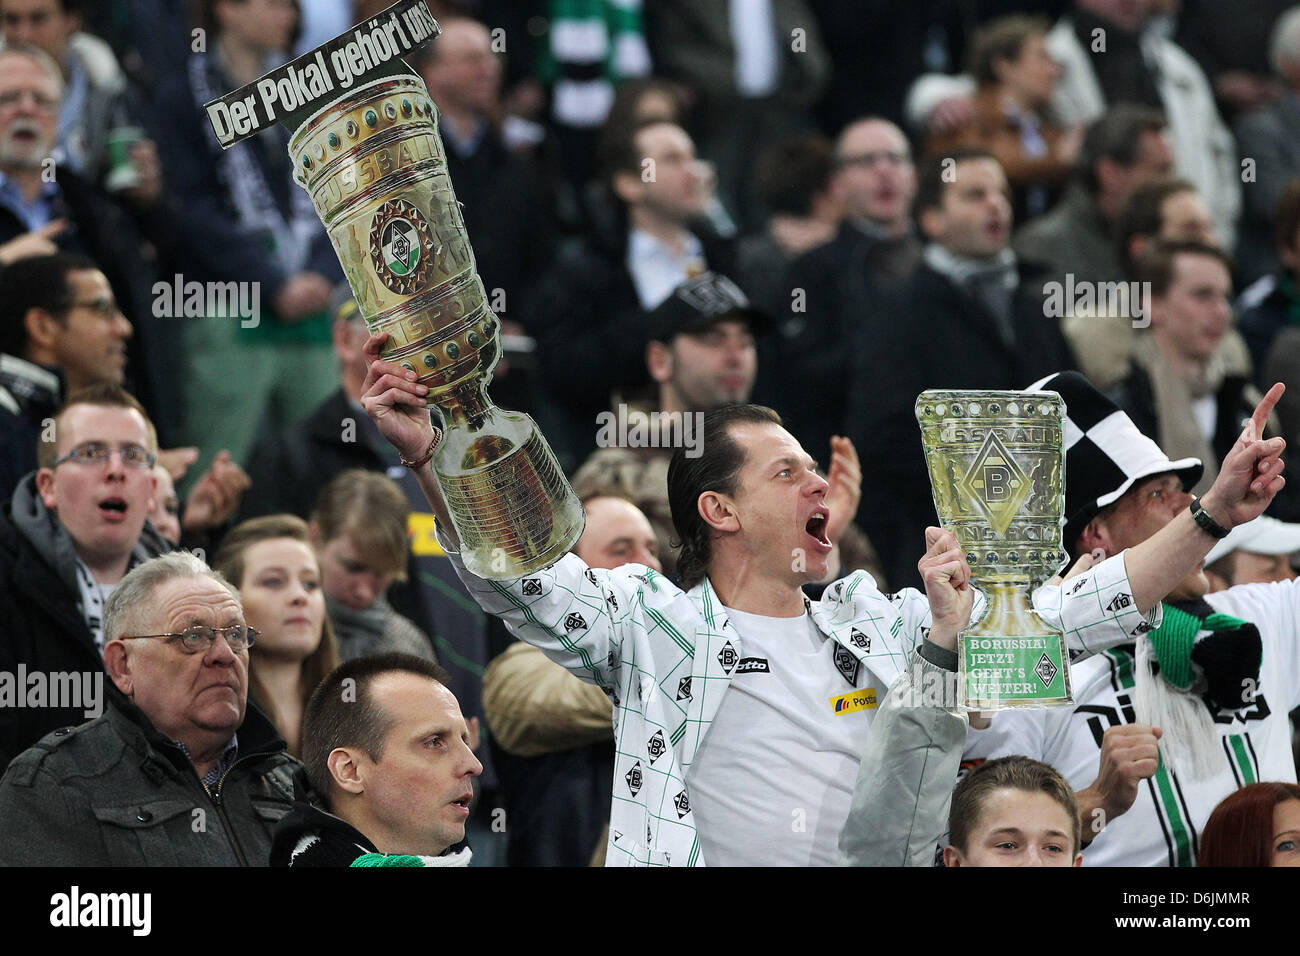 A fan of Moenchengladbach holds up a paper model of the Cup trophy during the DFB Cup semifinal soccer match between Borussia Moenchengladbacj and Bayern Munich at the Borussia Park in Moenchengladbach, Germany, 21 March 2012. Photo: Revierfoto Stock Photo